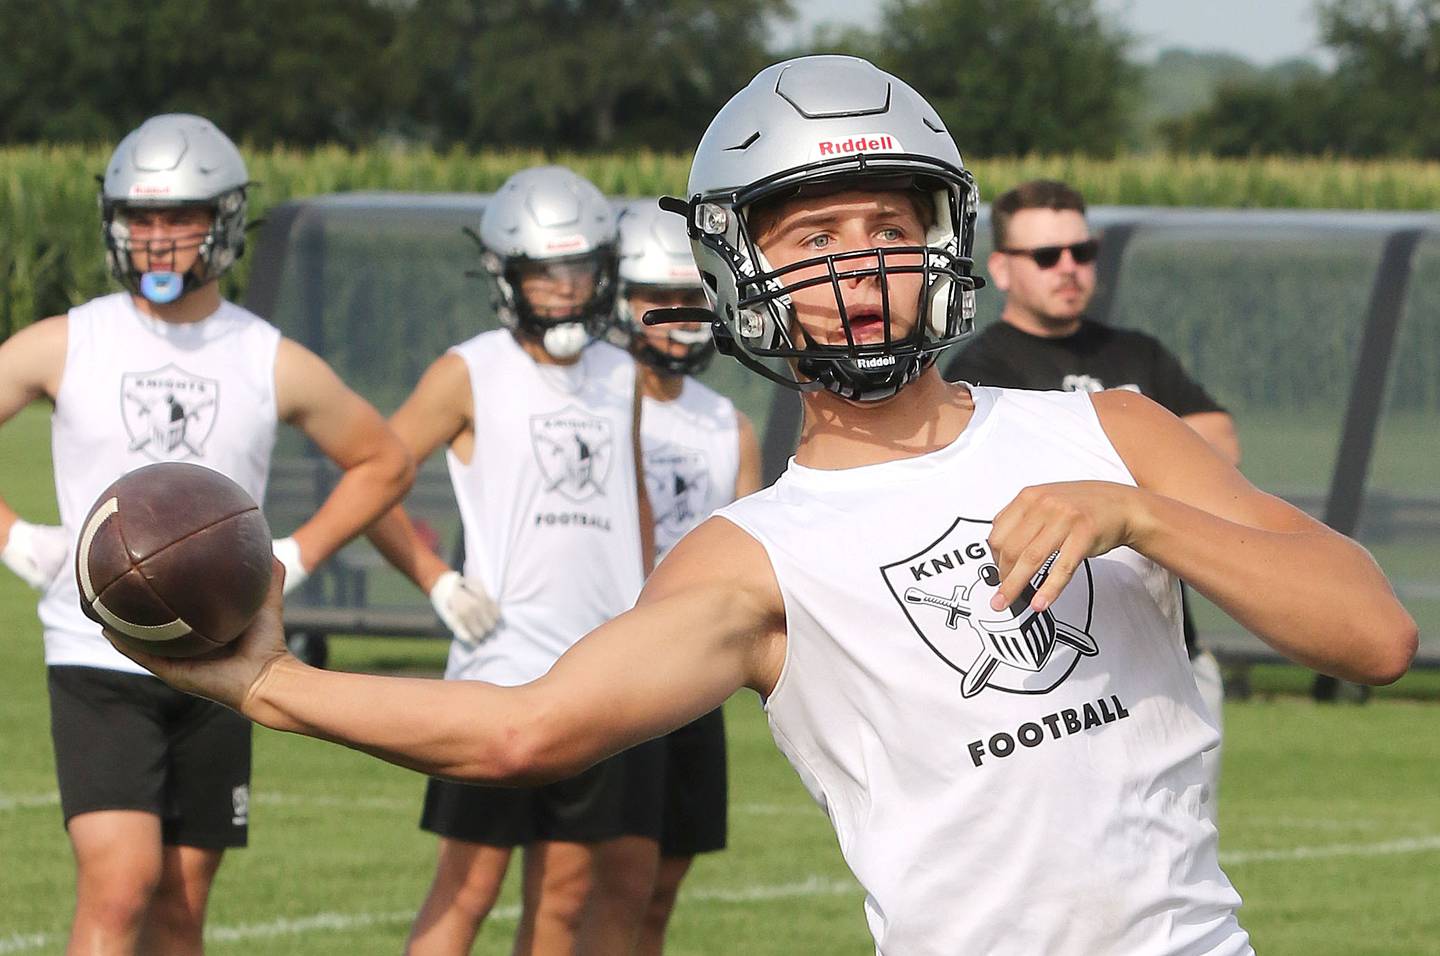 Kaneland quarterback Troyer Carlson fires a pass during 7-on-7 drills against DeKalb Tuesday, July 26, 2022, at Kaneland High School in Maple Park.